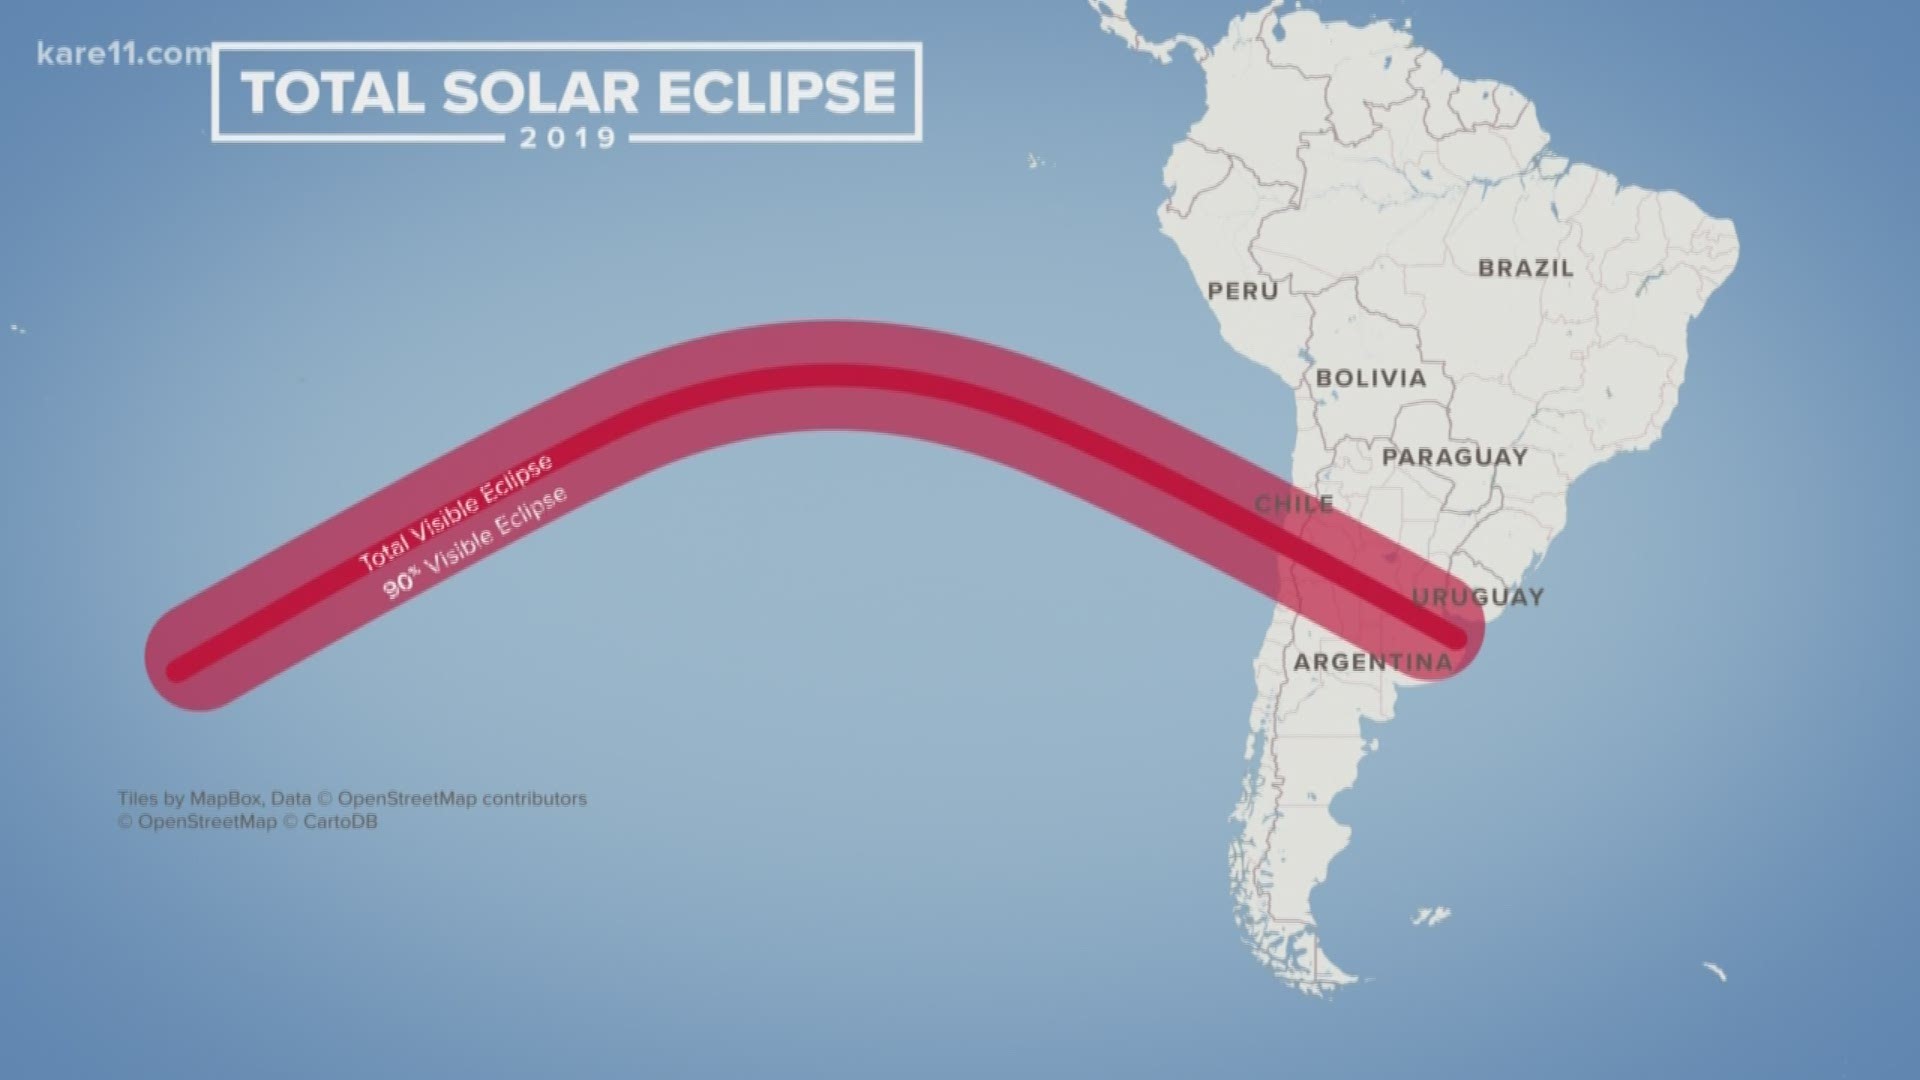 The first and only solar eclipse of 2019 will be visible in portions of South America today.